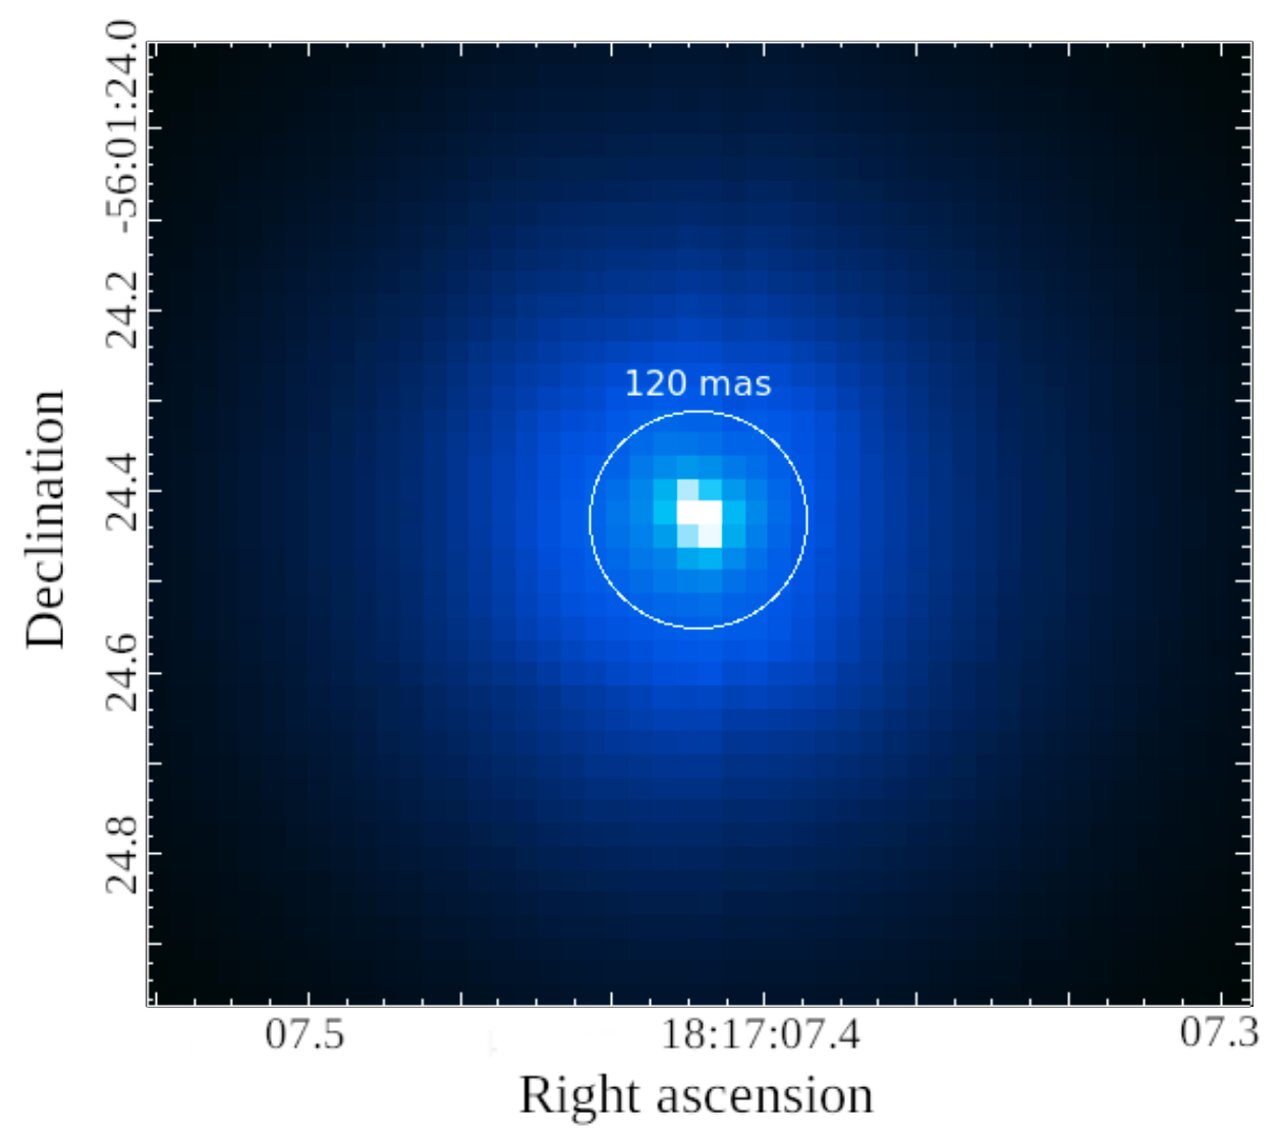 MUSE observations of HR 6819